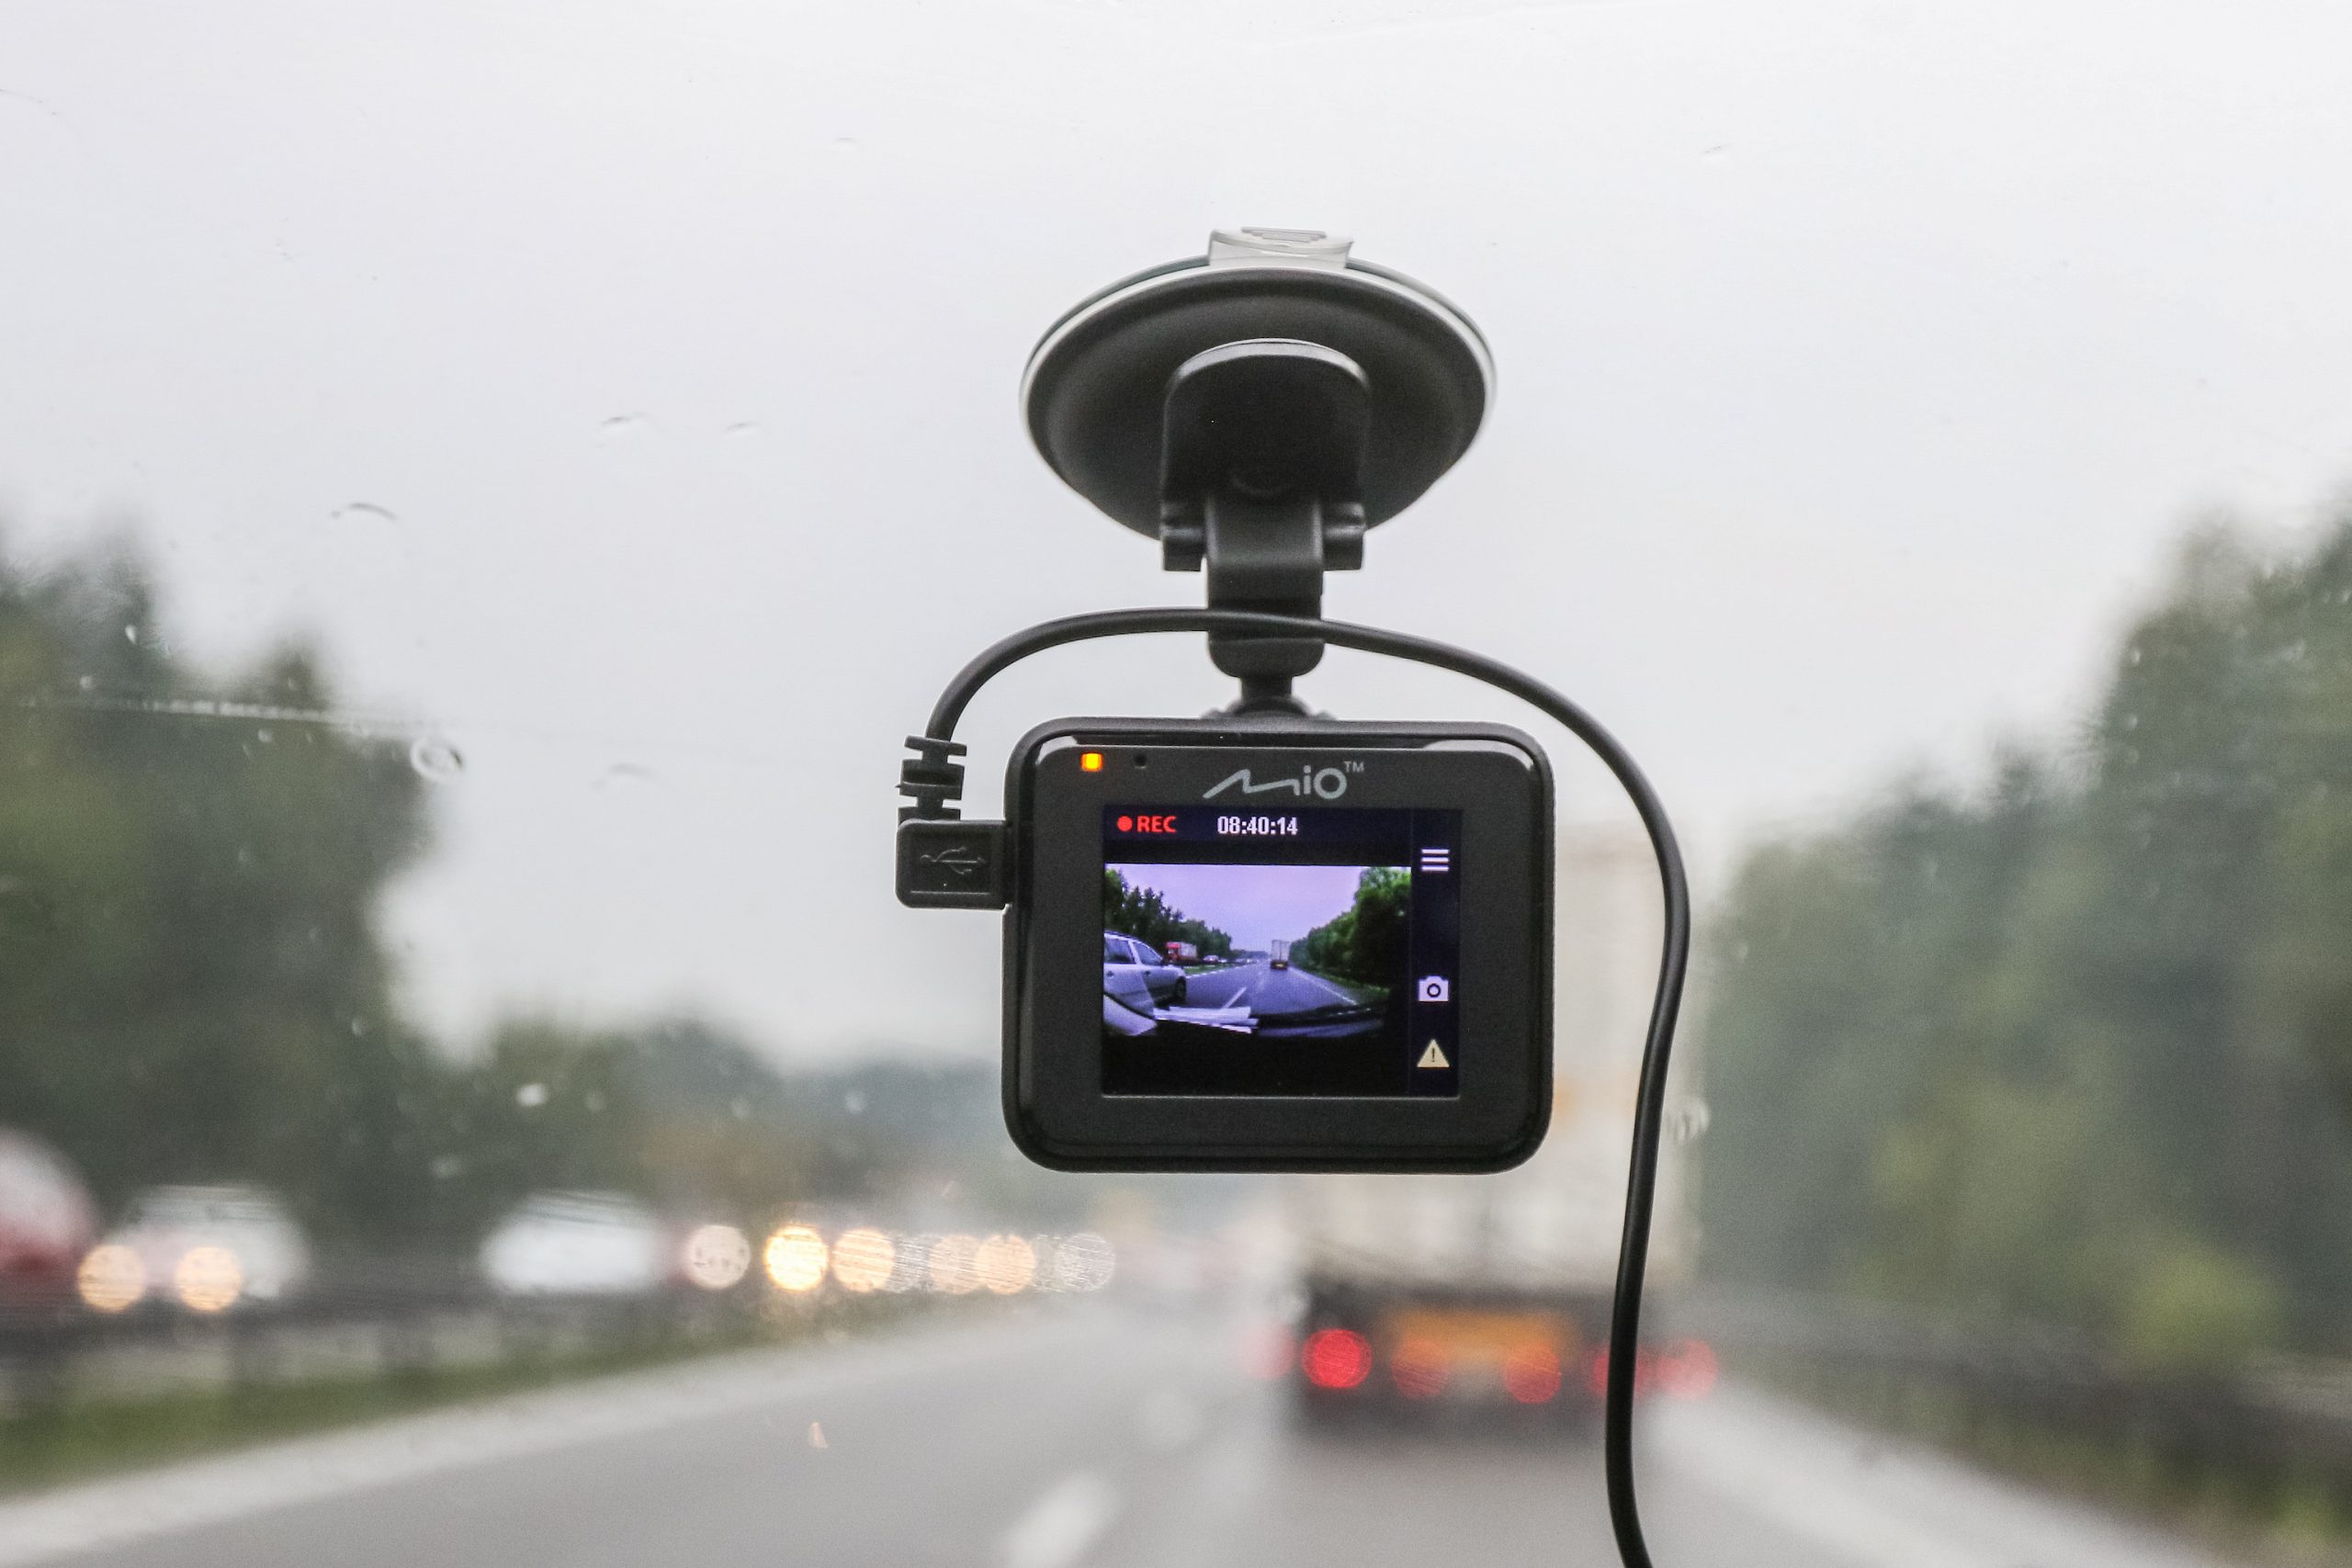 Mio dash cam mounted in car is seen in Gdansk, Poland on 14 August 2018 Sales of car cameras (dash cams) is growing in Poland